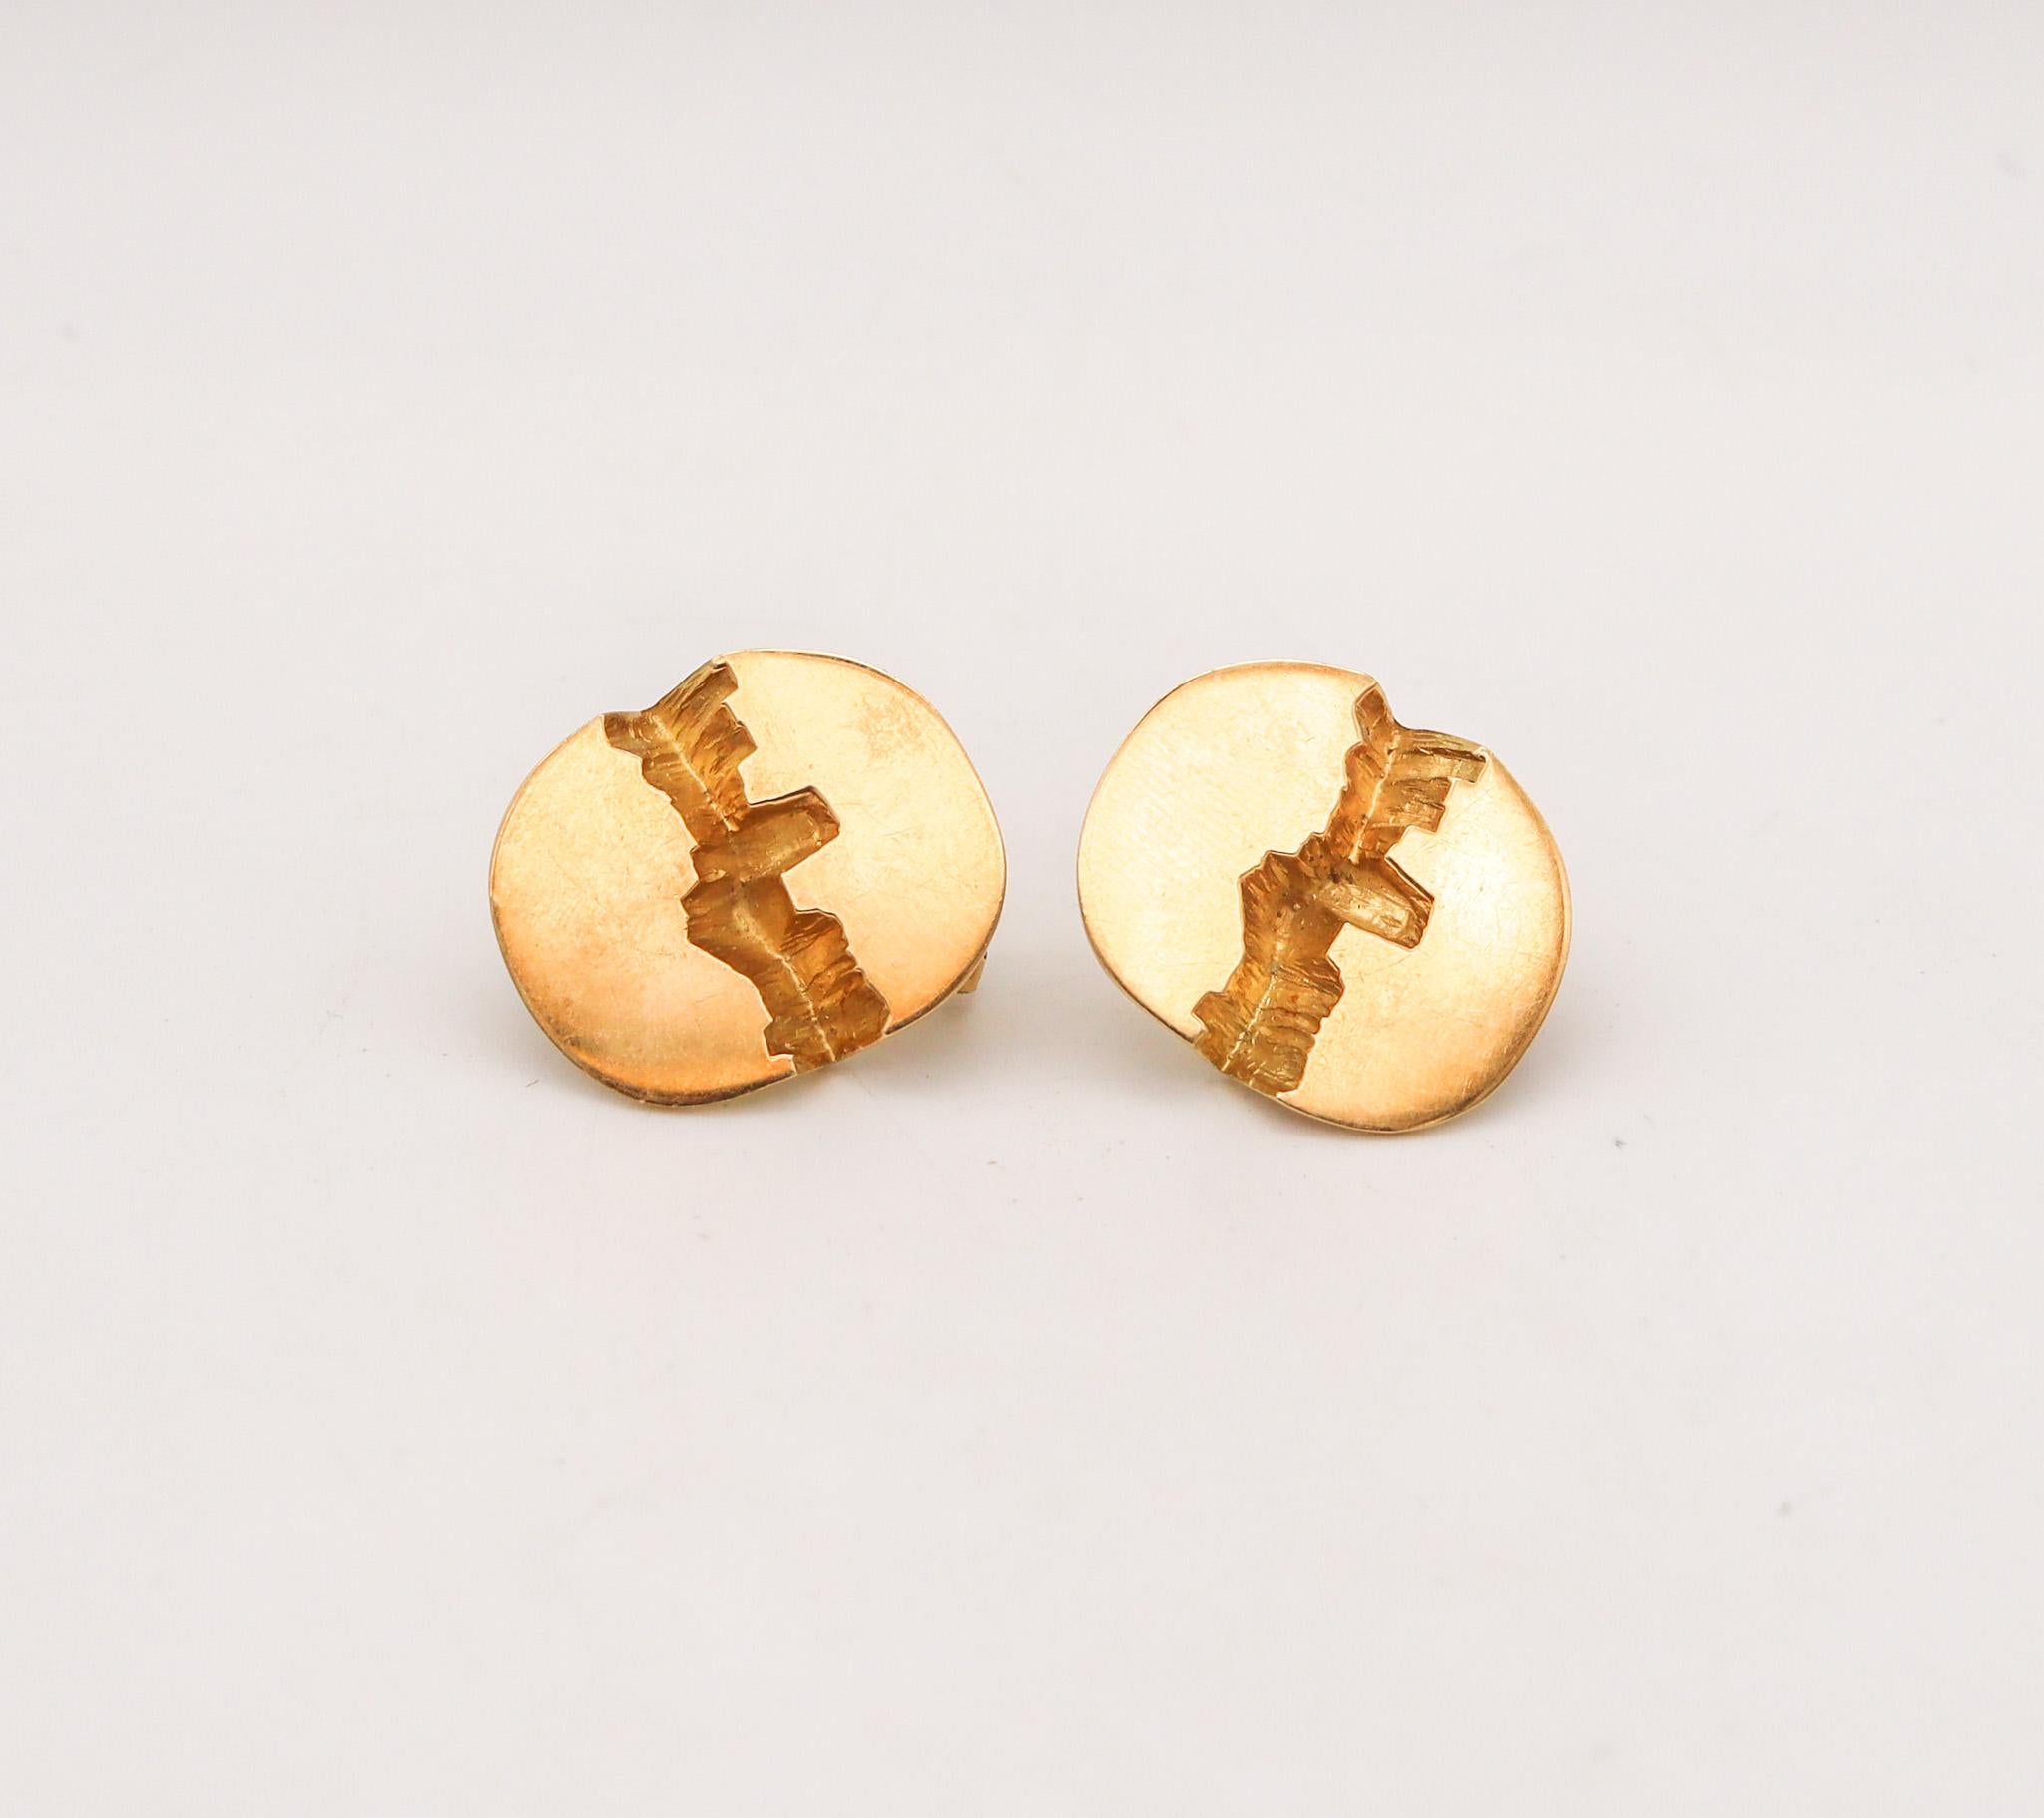 Modernist Grand Canyon earrings designed by Gubelin.

Fabulous pair of clips-on earrings, created during the modernism period back in the 1970. These sculptural earrings were crafted in Zurich Switzerland by the jewelry house of Gubelin in solid